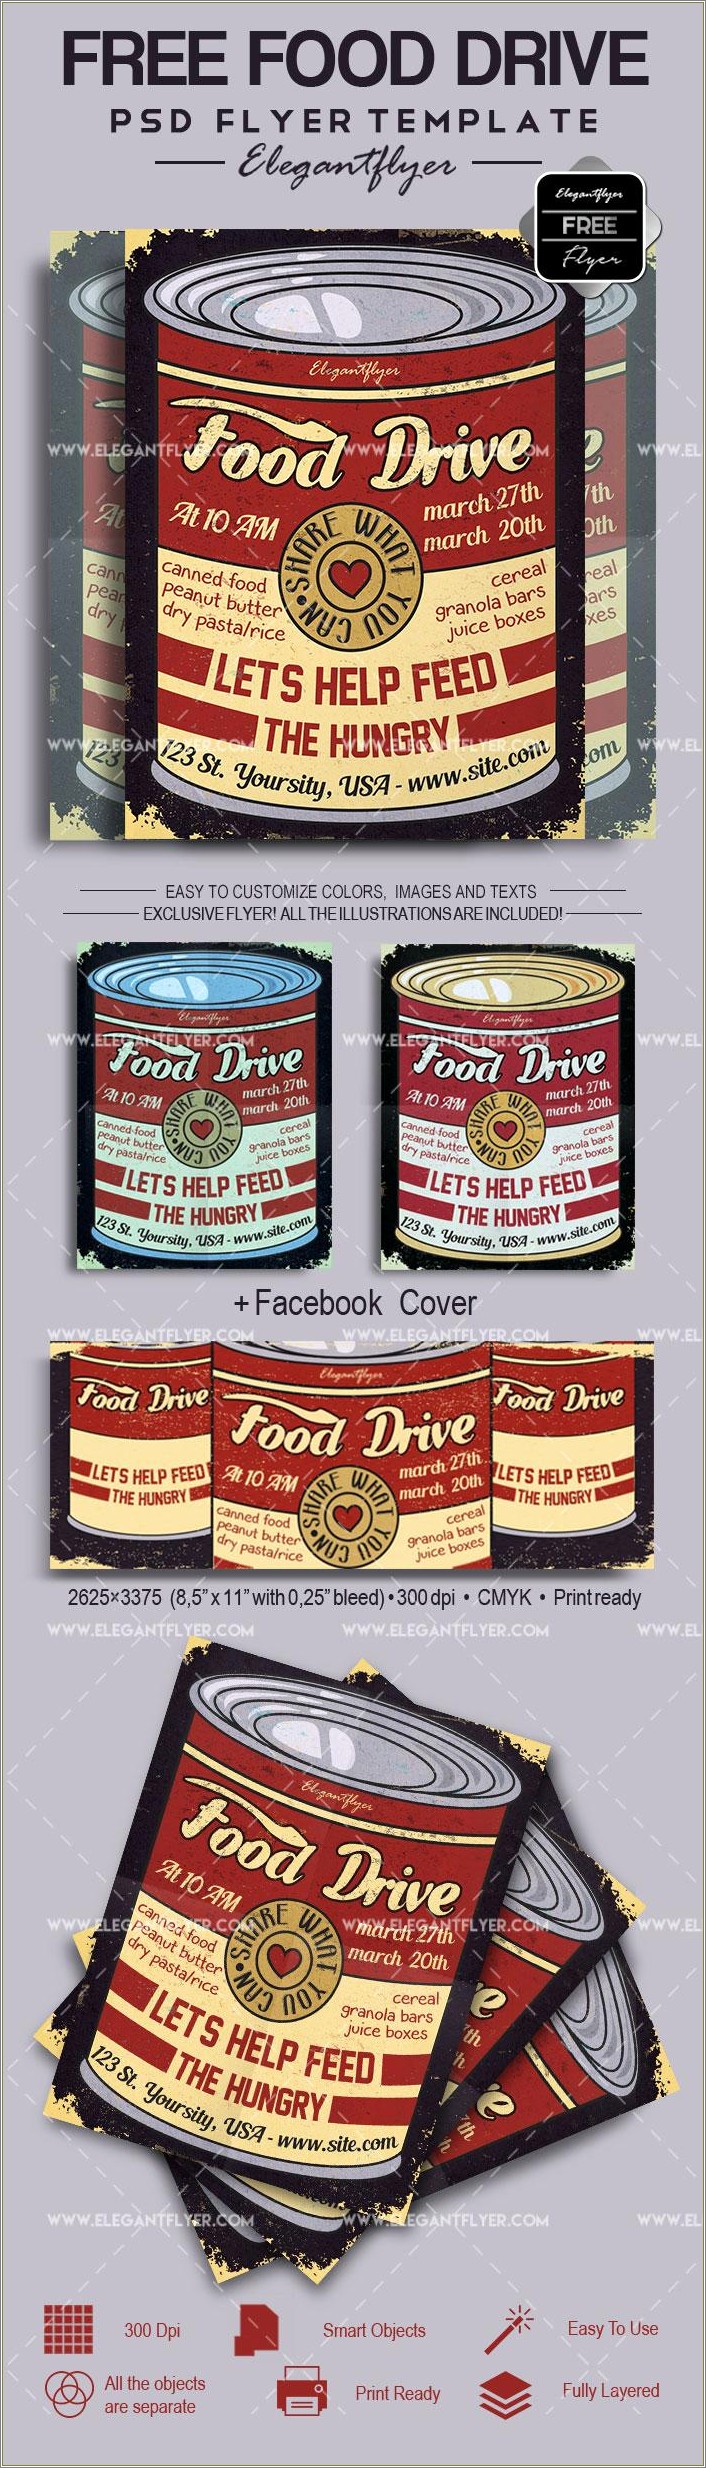 Free Canned Food Drive Flyer Template